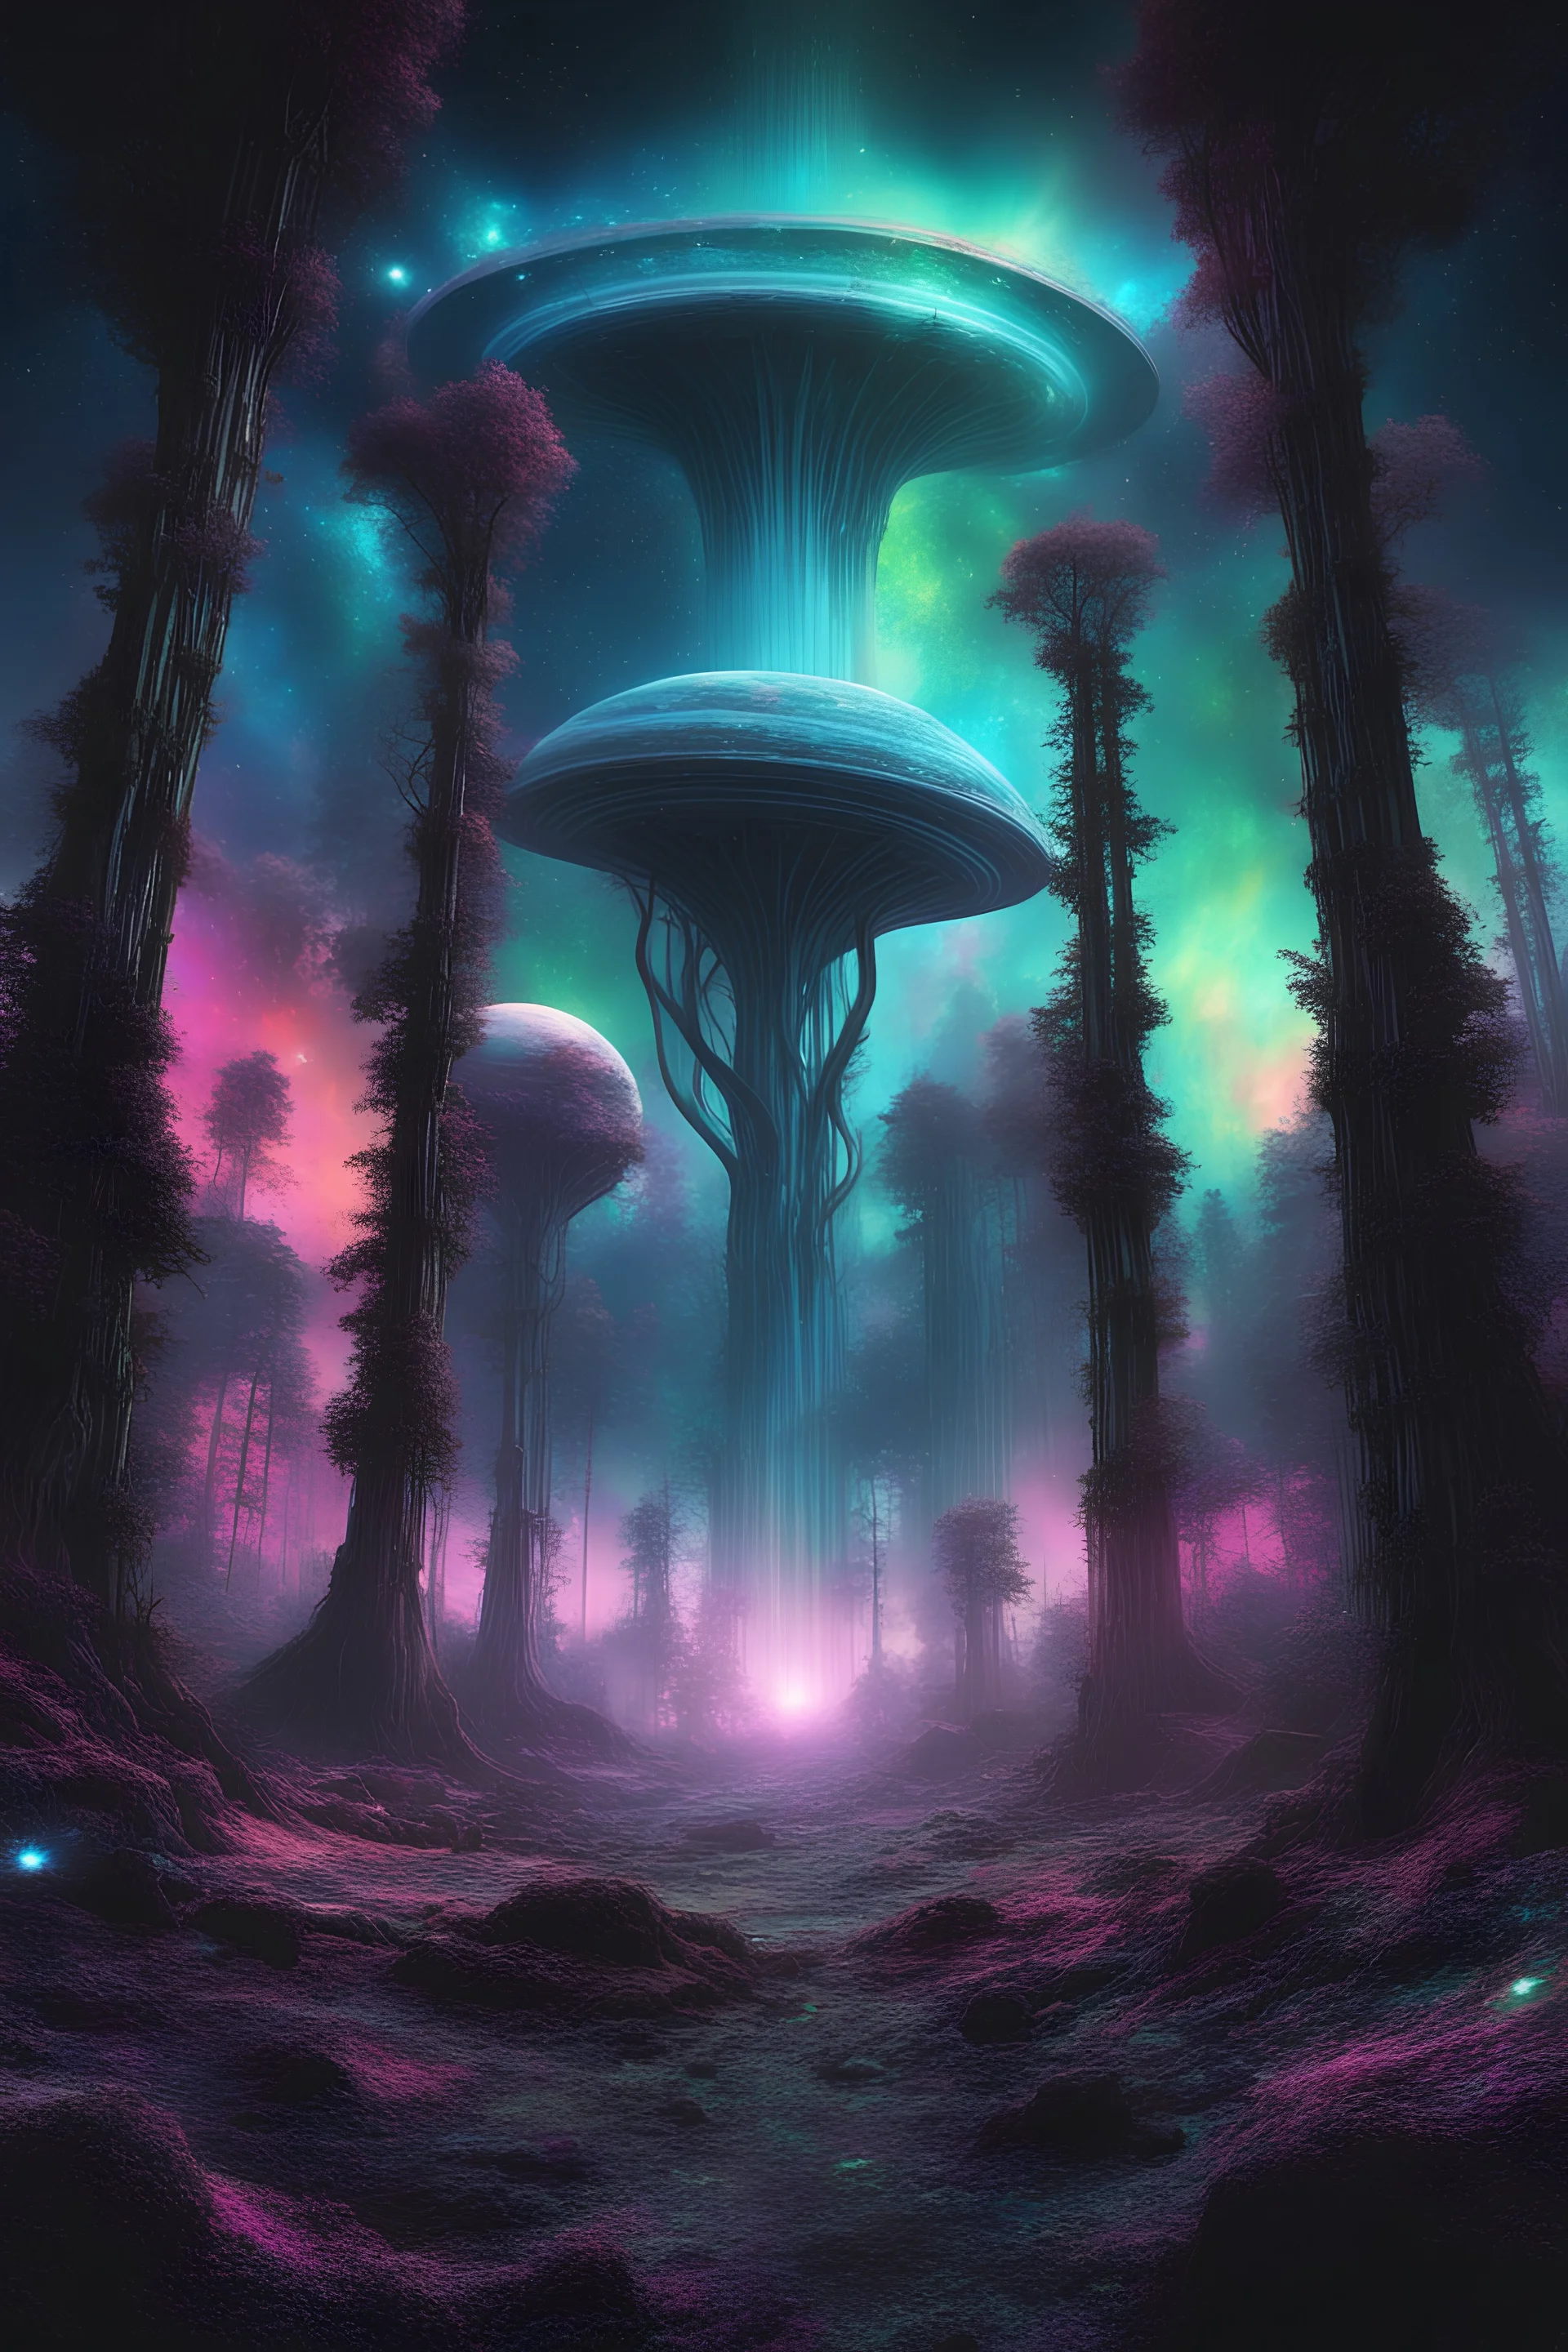 Huge aliens forest, nebula in background, cosmic black and iridescent, split perspective, Neo-baroque digital glitch art, hyper detailed NASA images, photorealistic